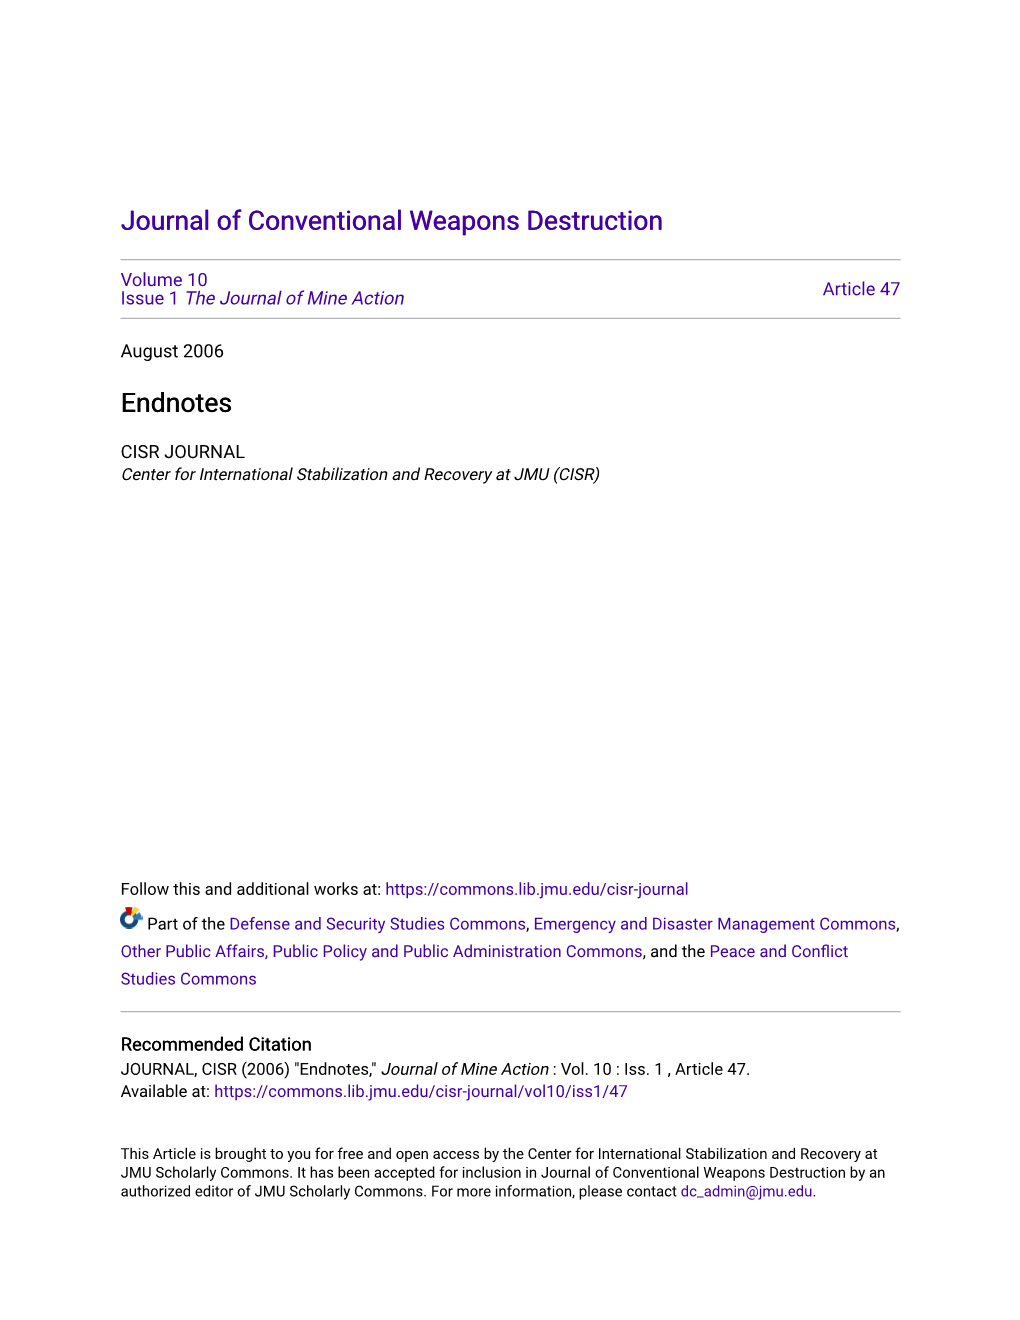 Journal of Conventional Weapons Destruction Endnotes